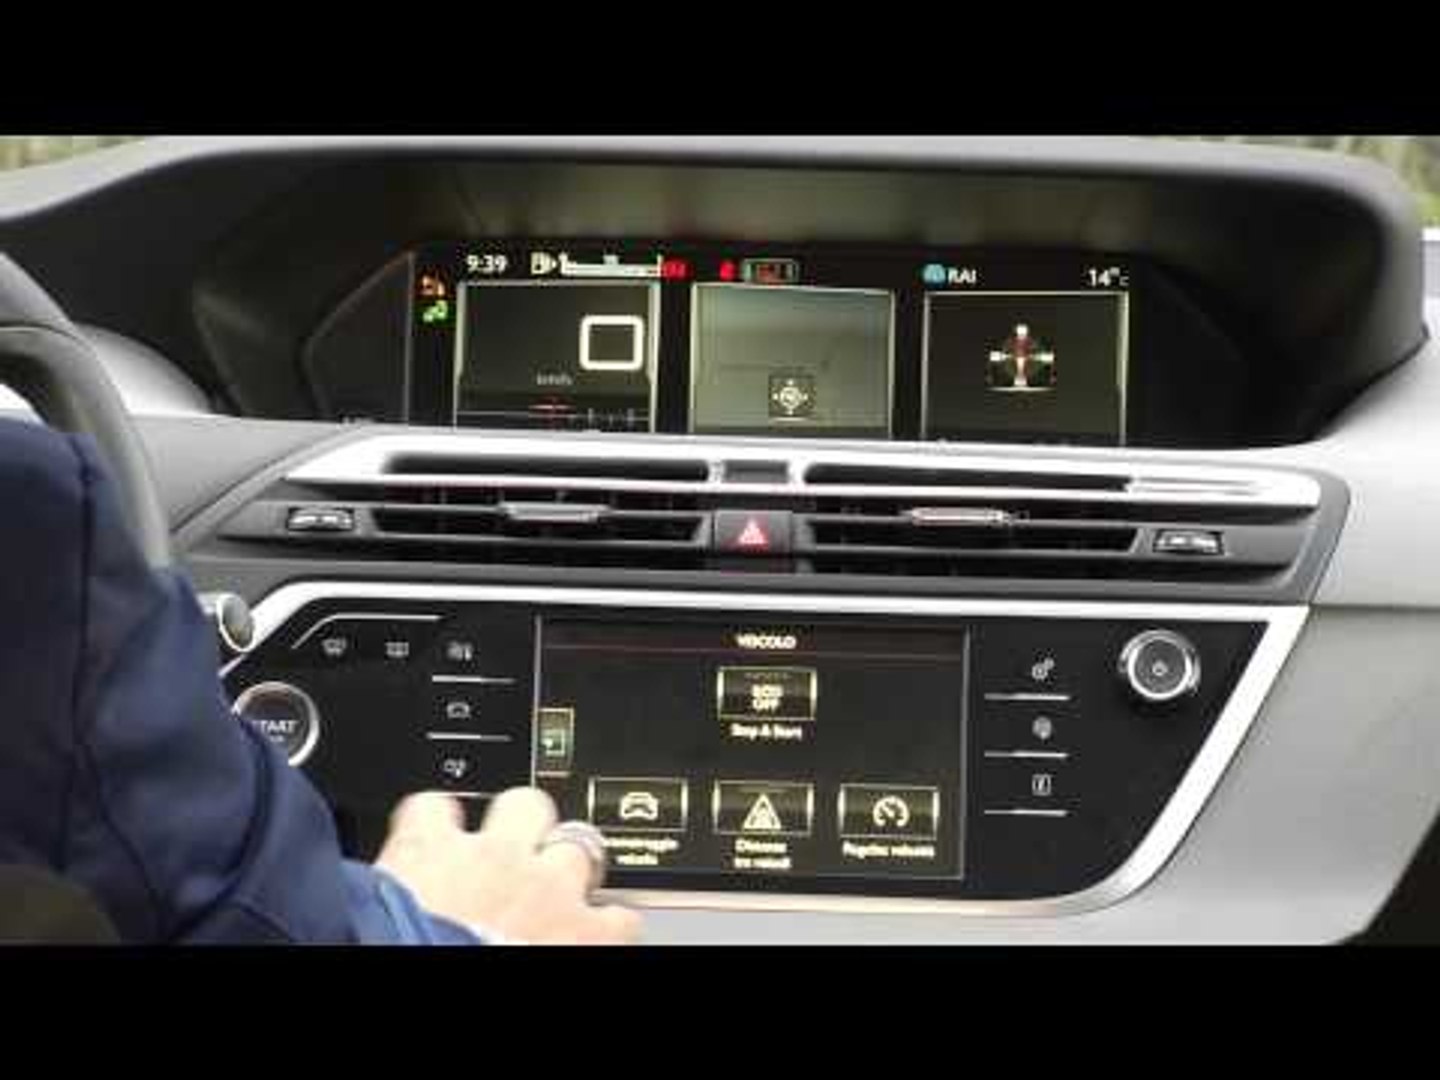 New Citroen C4 Picasso Accessories | AutoMotoTV - video Dailymotion